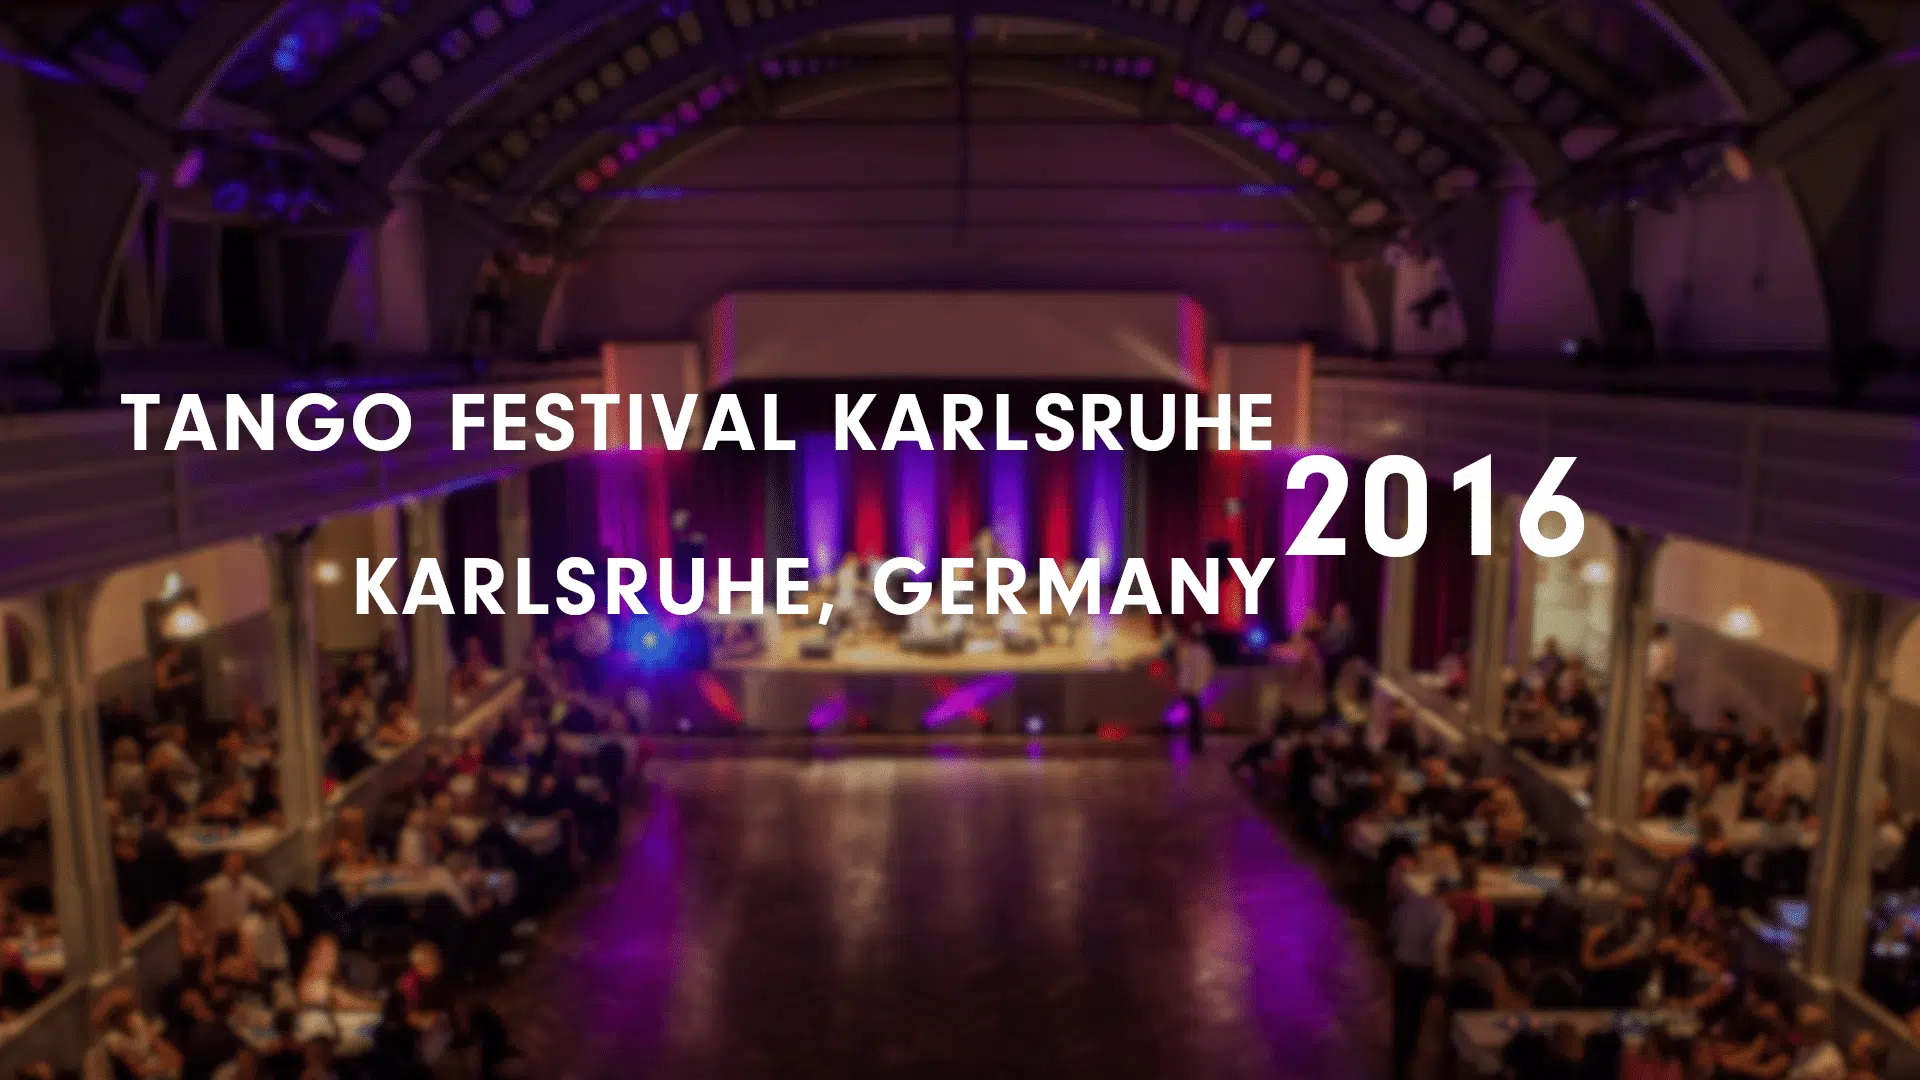 Tango Festival Karlsruhe 2016 event picture